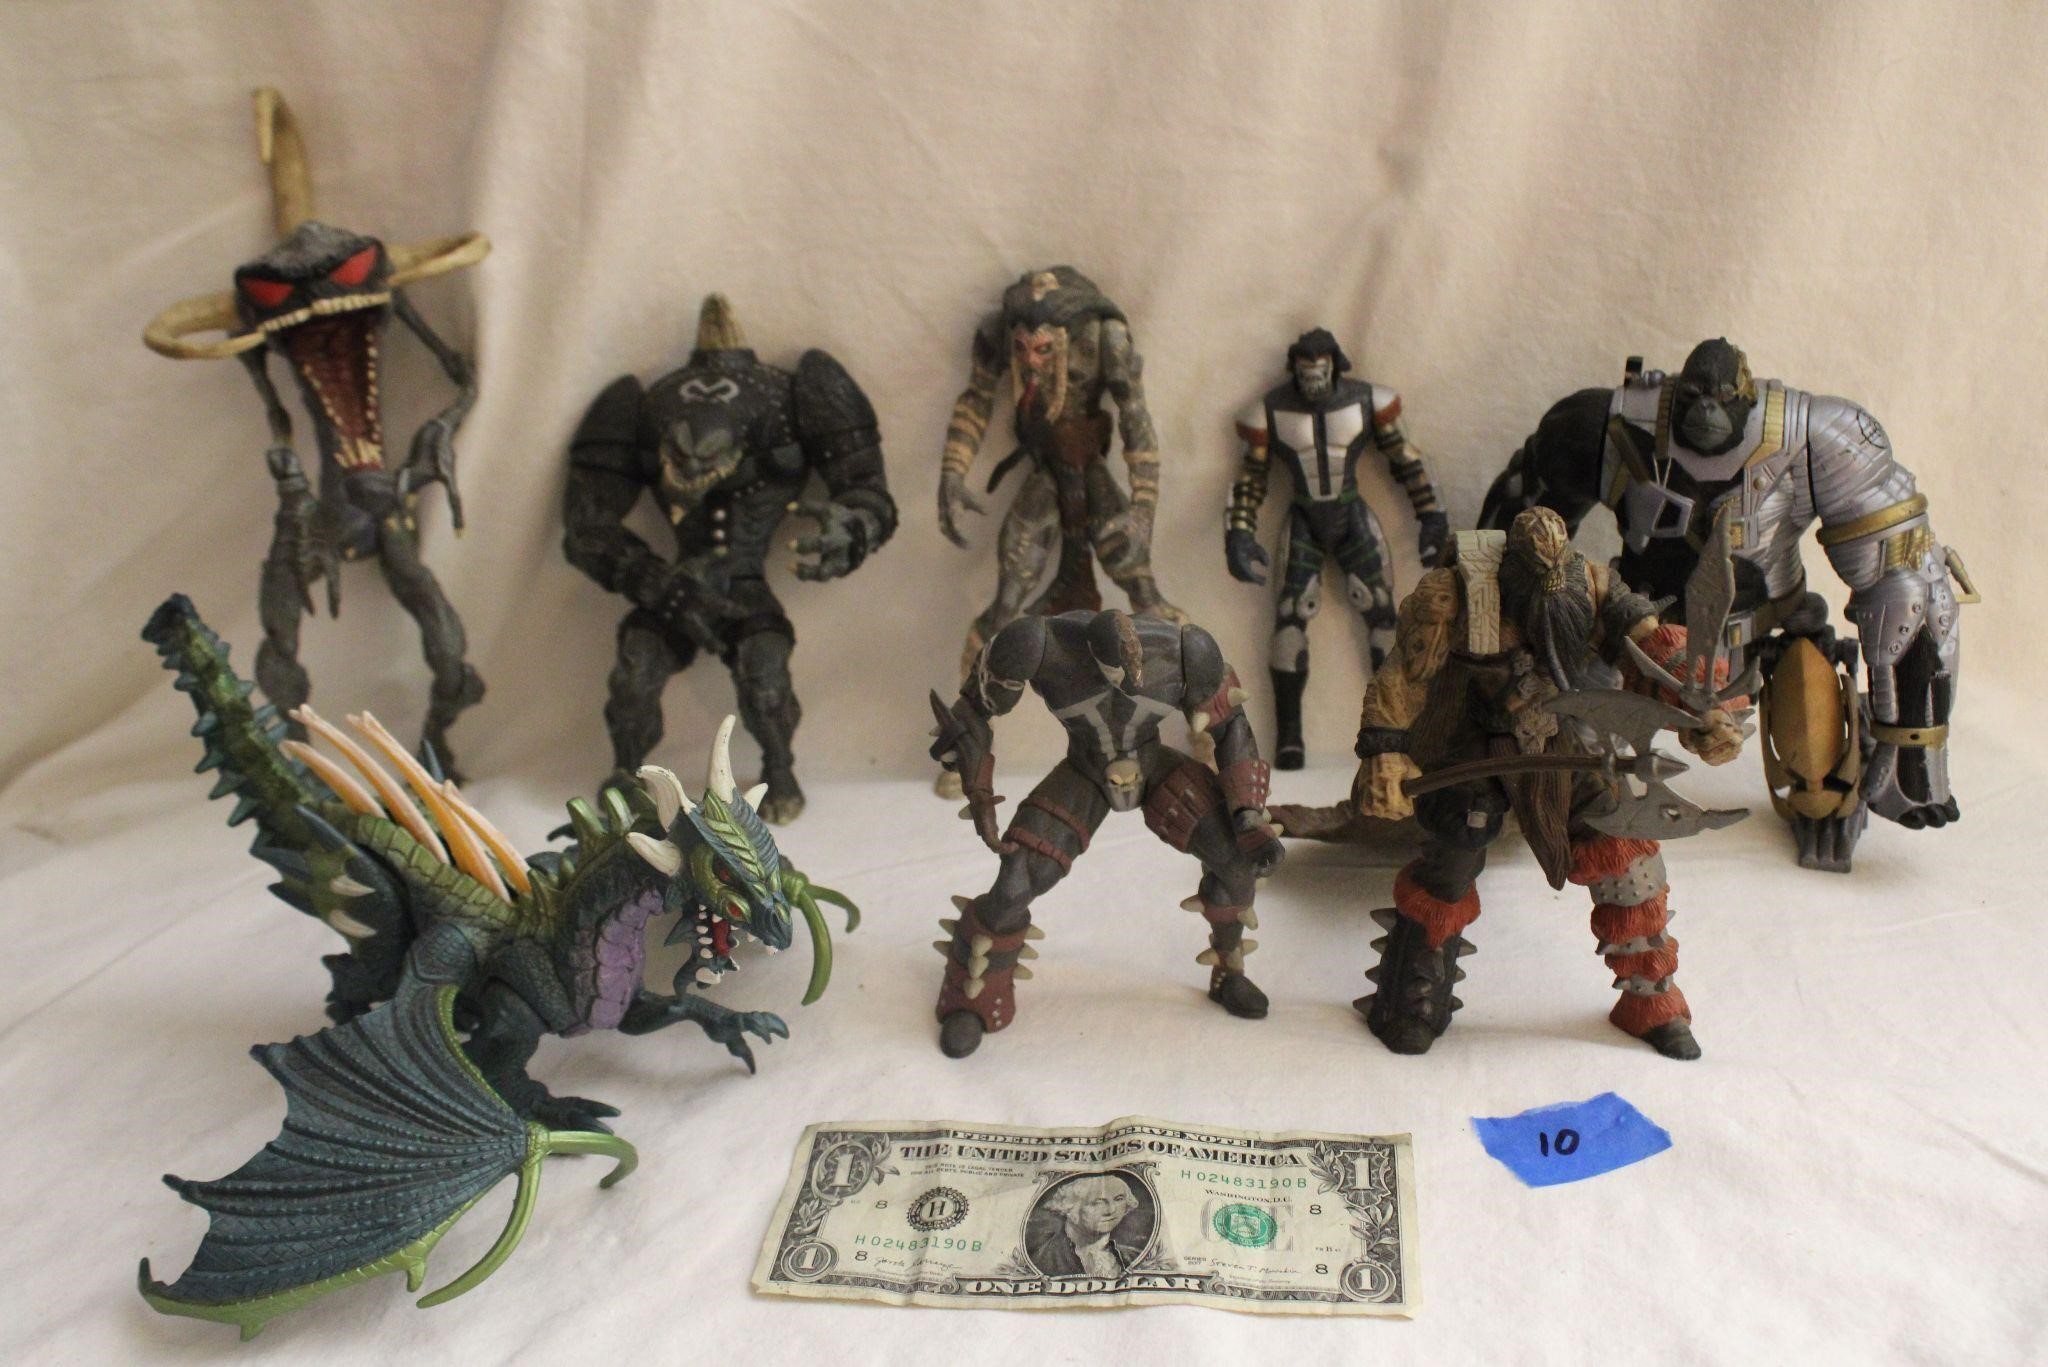 9 Different Spawn Action Figures